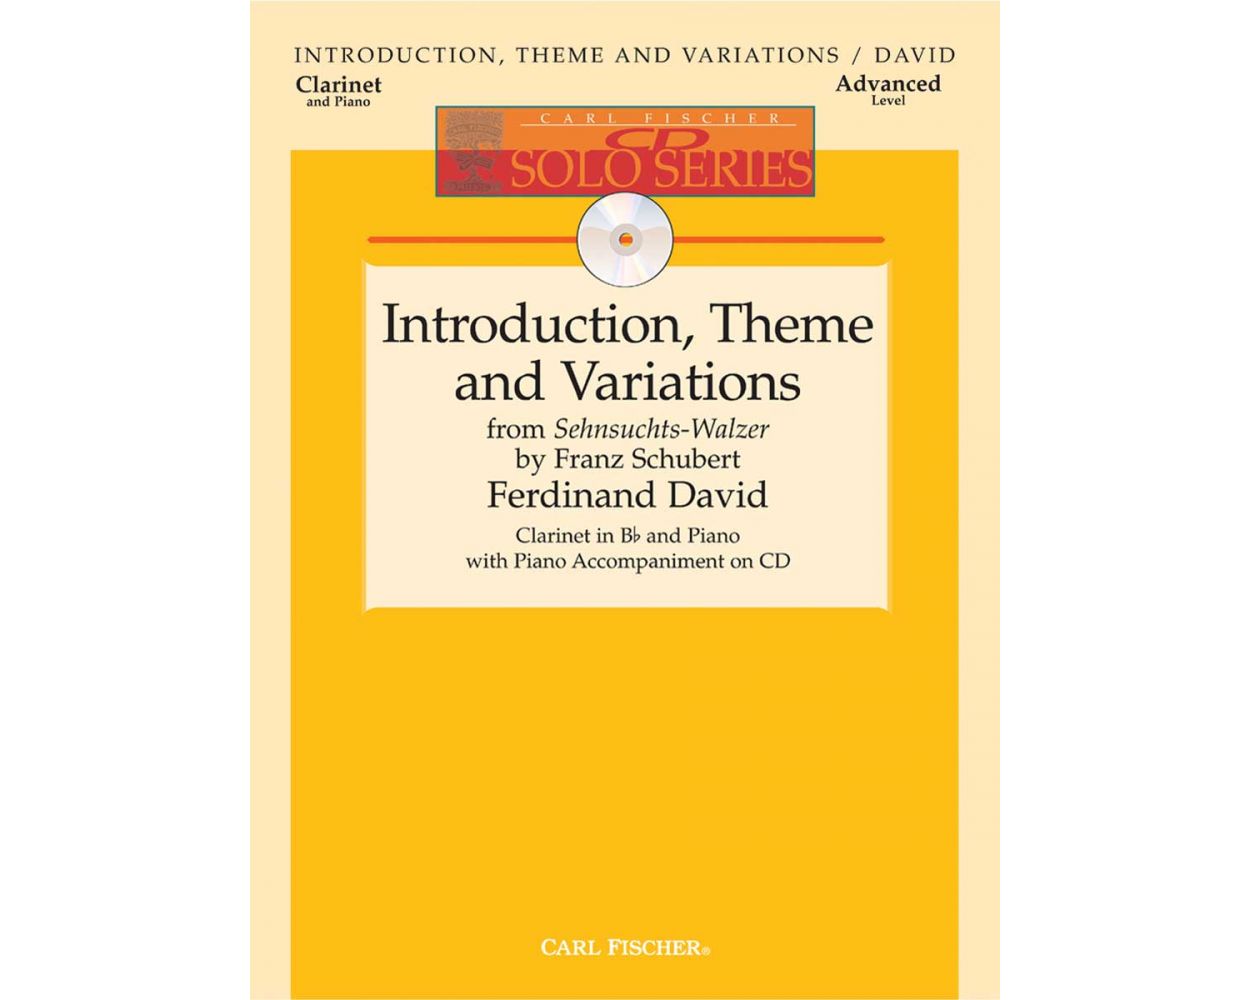 David Introduction, Theme and Variations